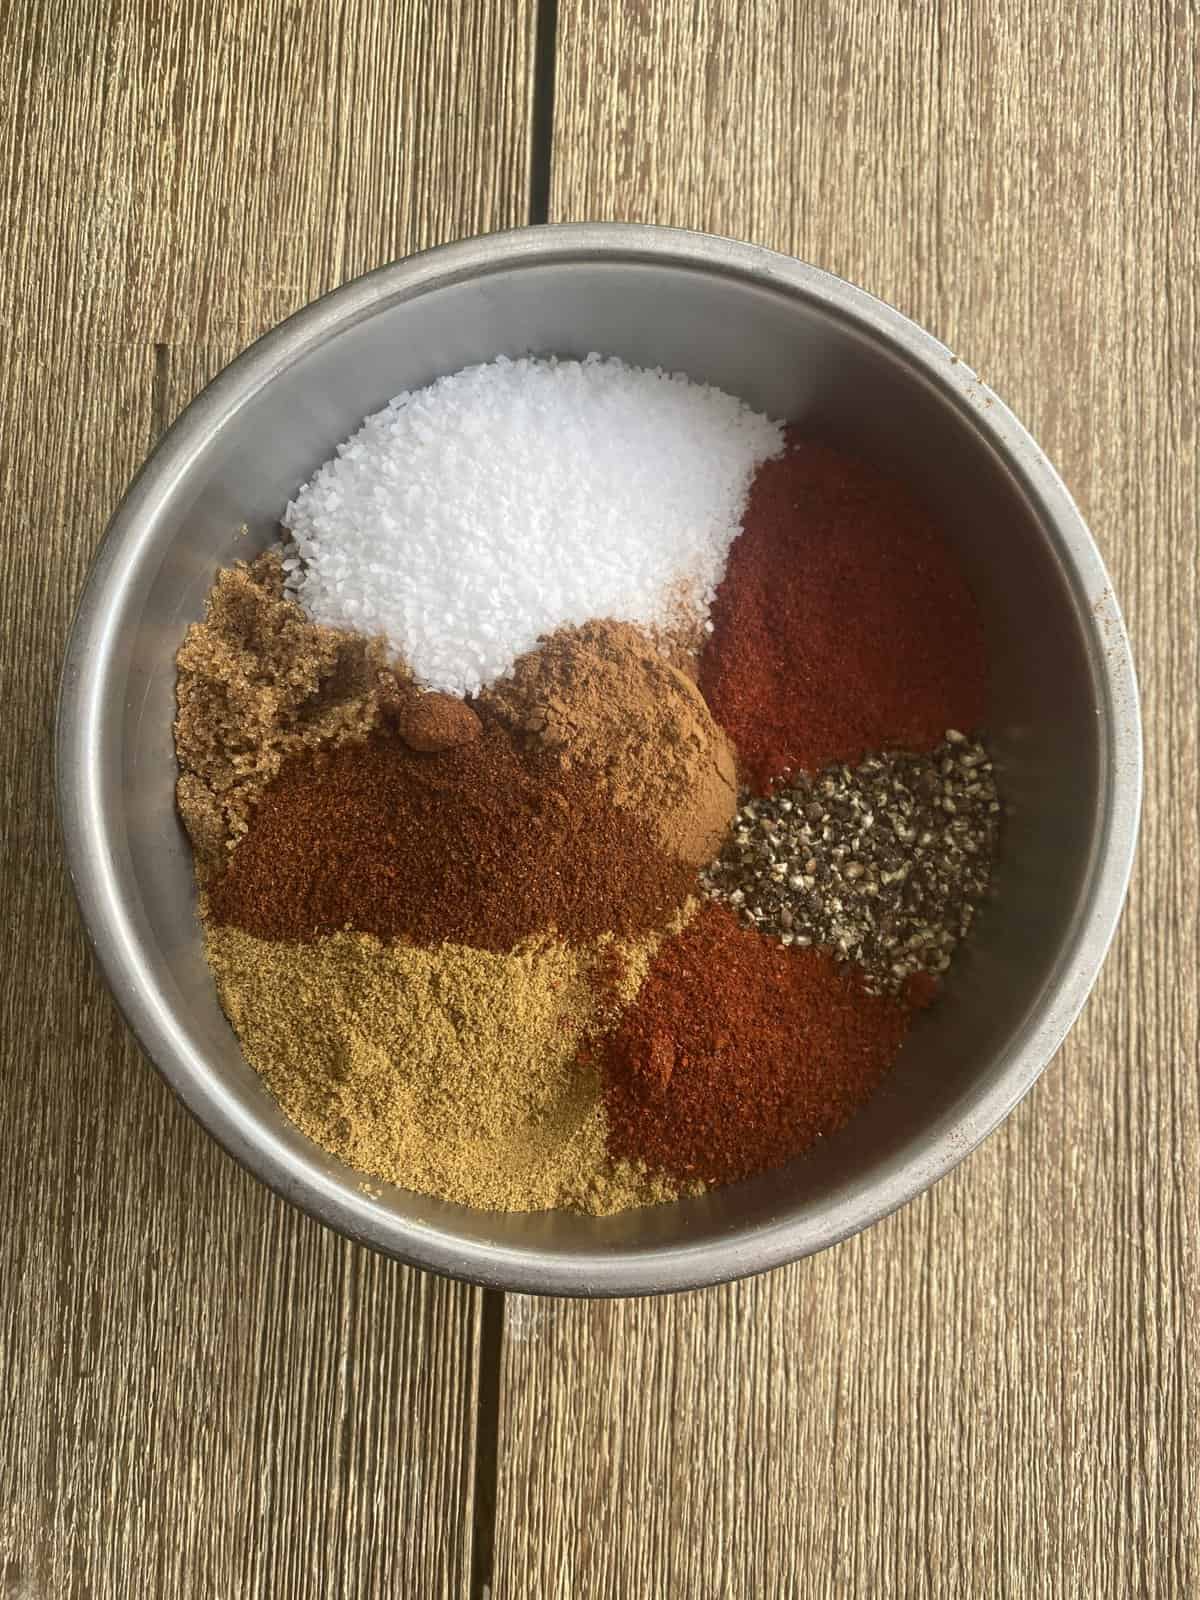 Spice Blend in Bowl